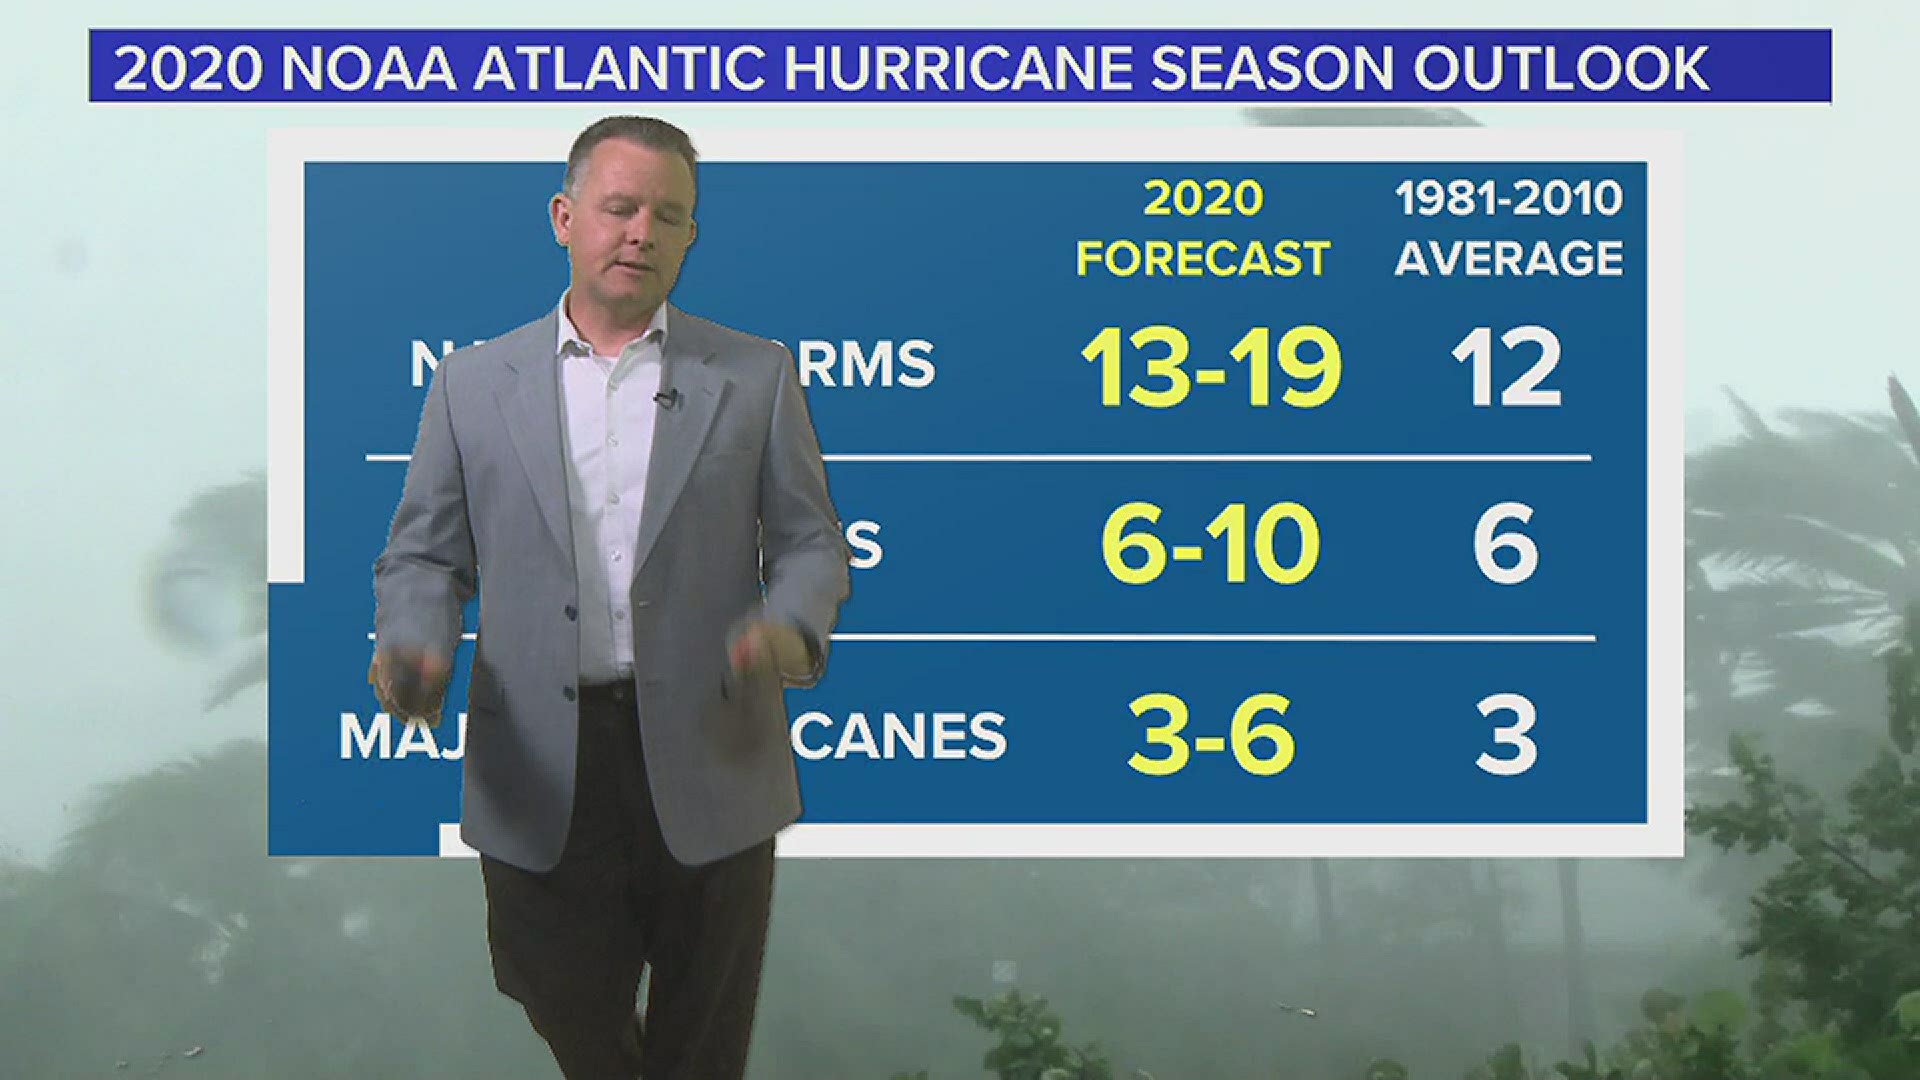 Tropical Storm Arthur was the first named storm of the 2020 Atlantic hurricane season.